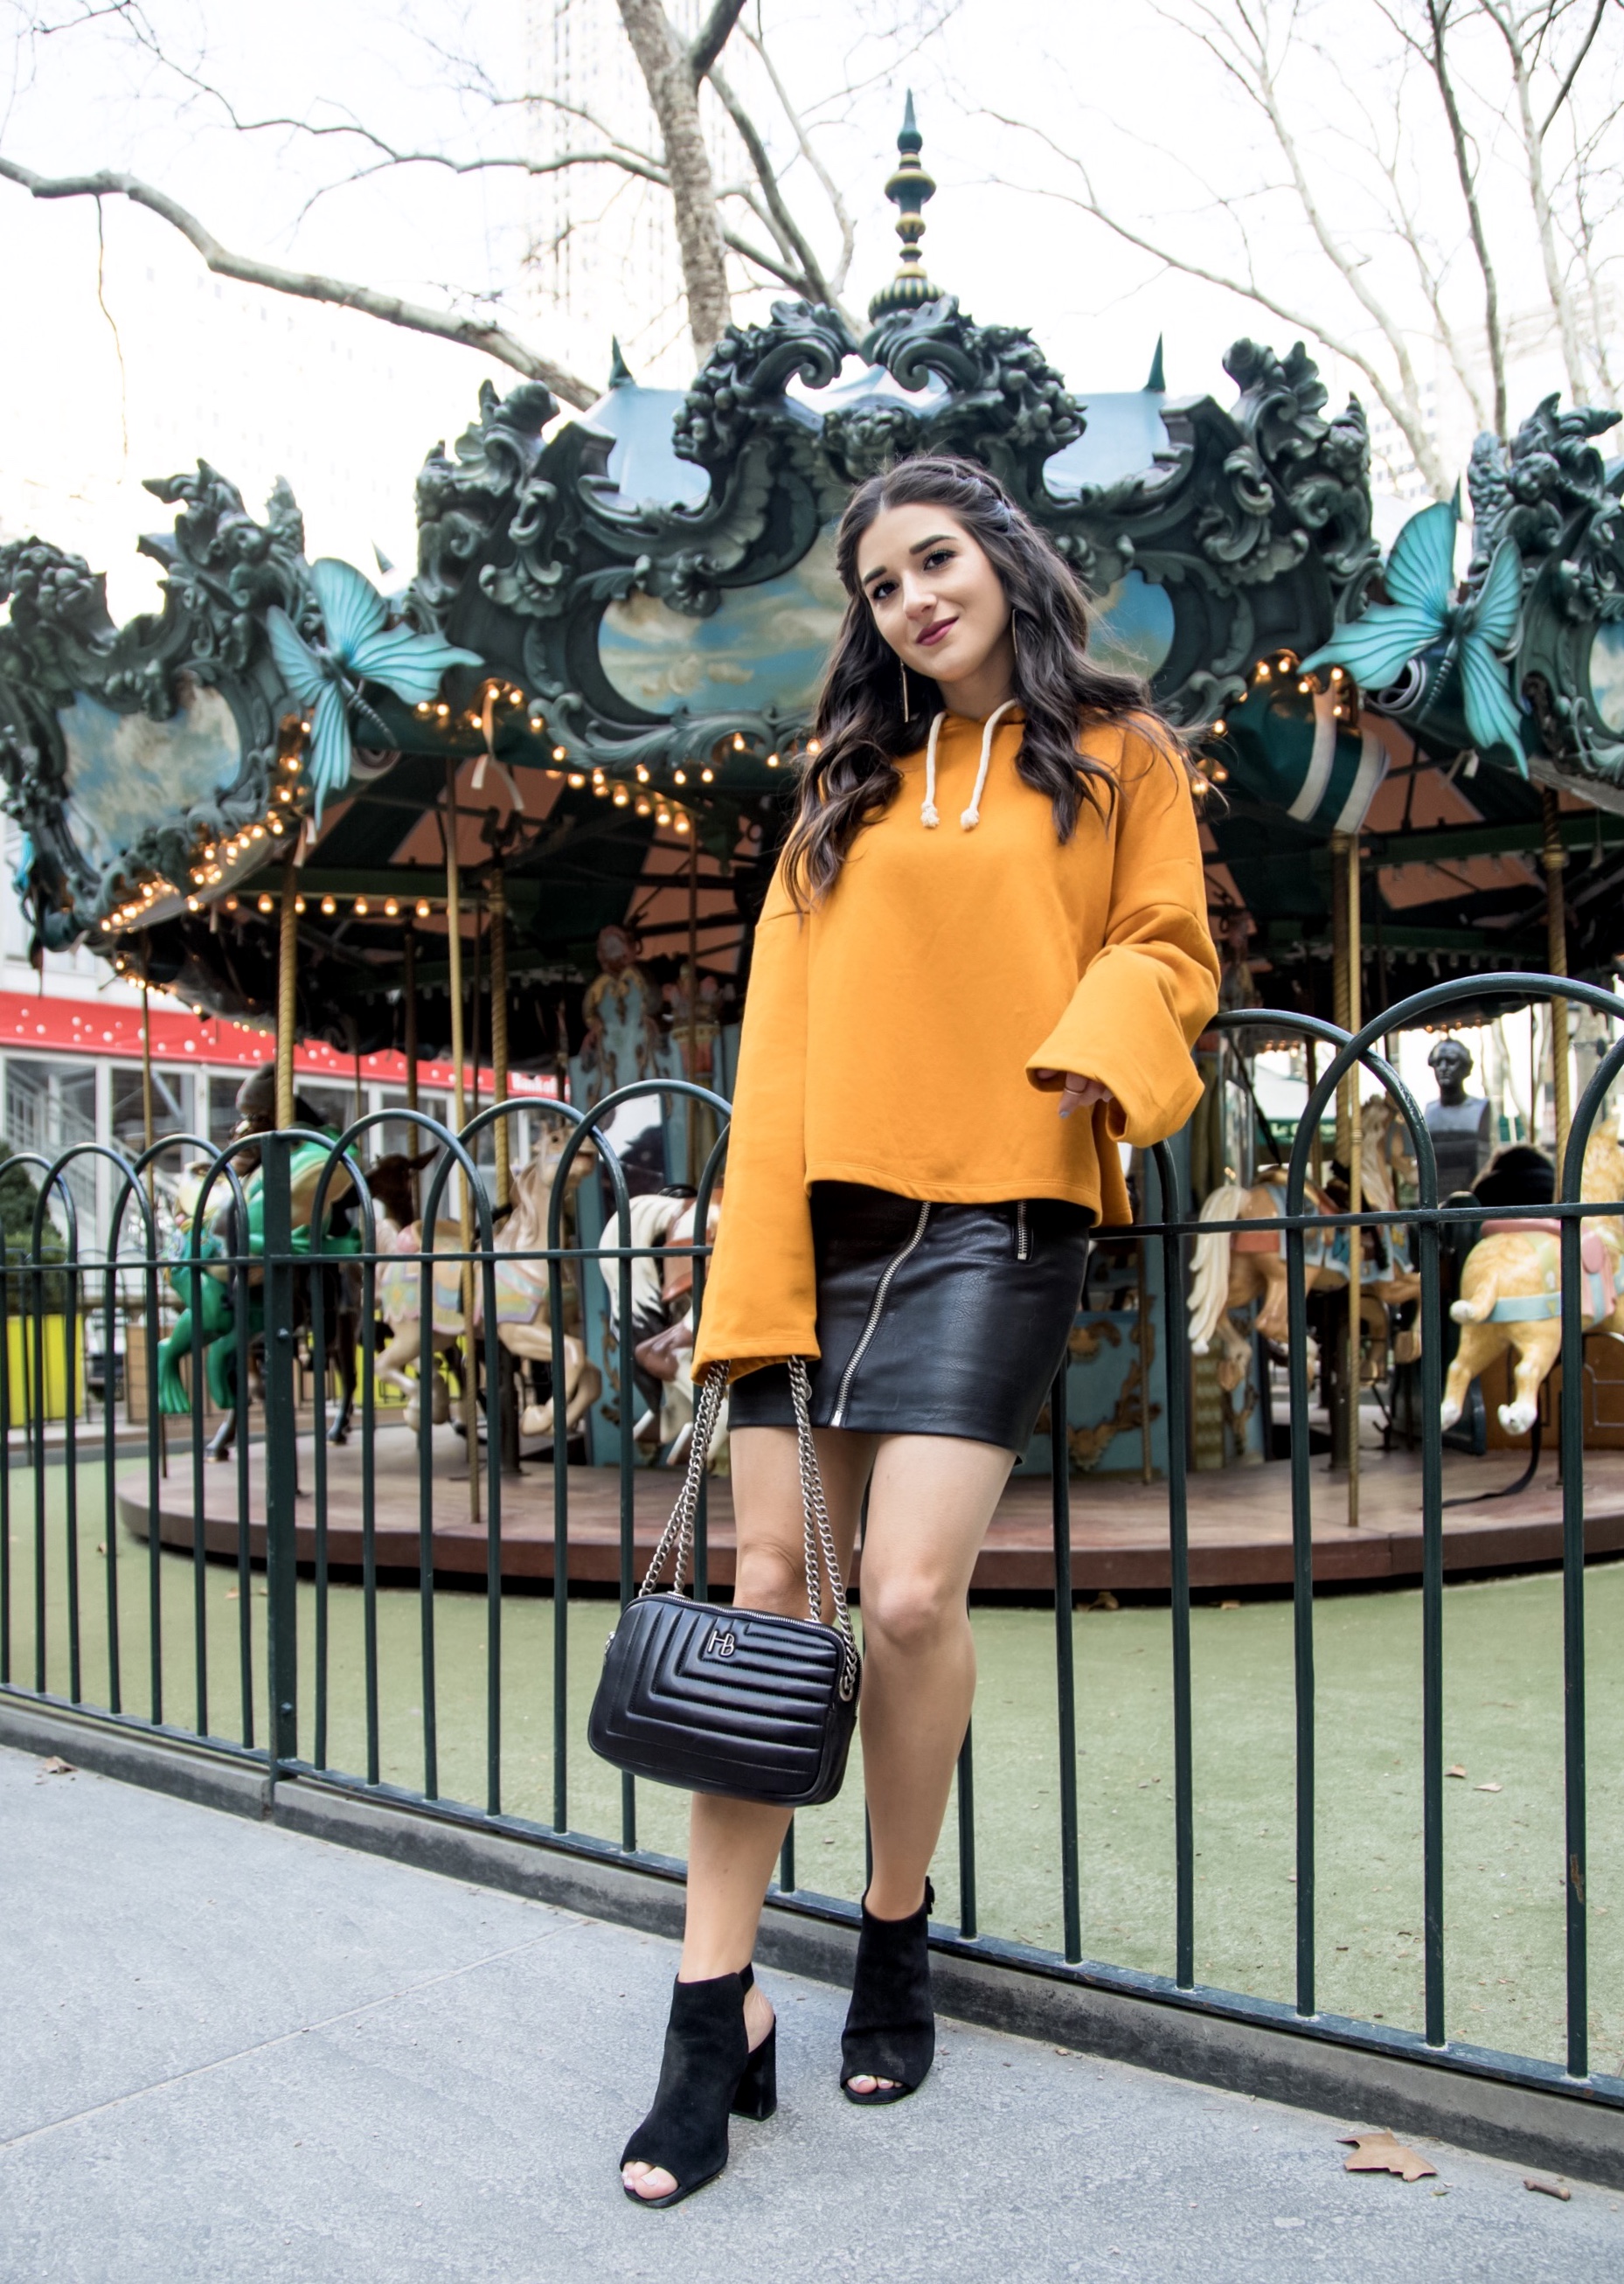 How Blogging Affected My Self Confidence Yellow Sweatshirt Black Pleather Skirt Esther Santer Fashion Blog NYC Street Style Blogger Outfit OOTD Trendy Zara ASOS Hairstyle Sporty Girly Open Toe Booties  Shopping Buy Wear Fall Winter Hood Mustard Color.jpg